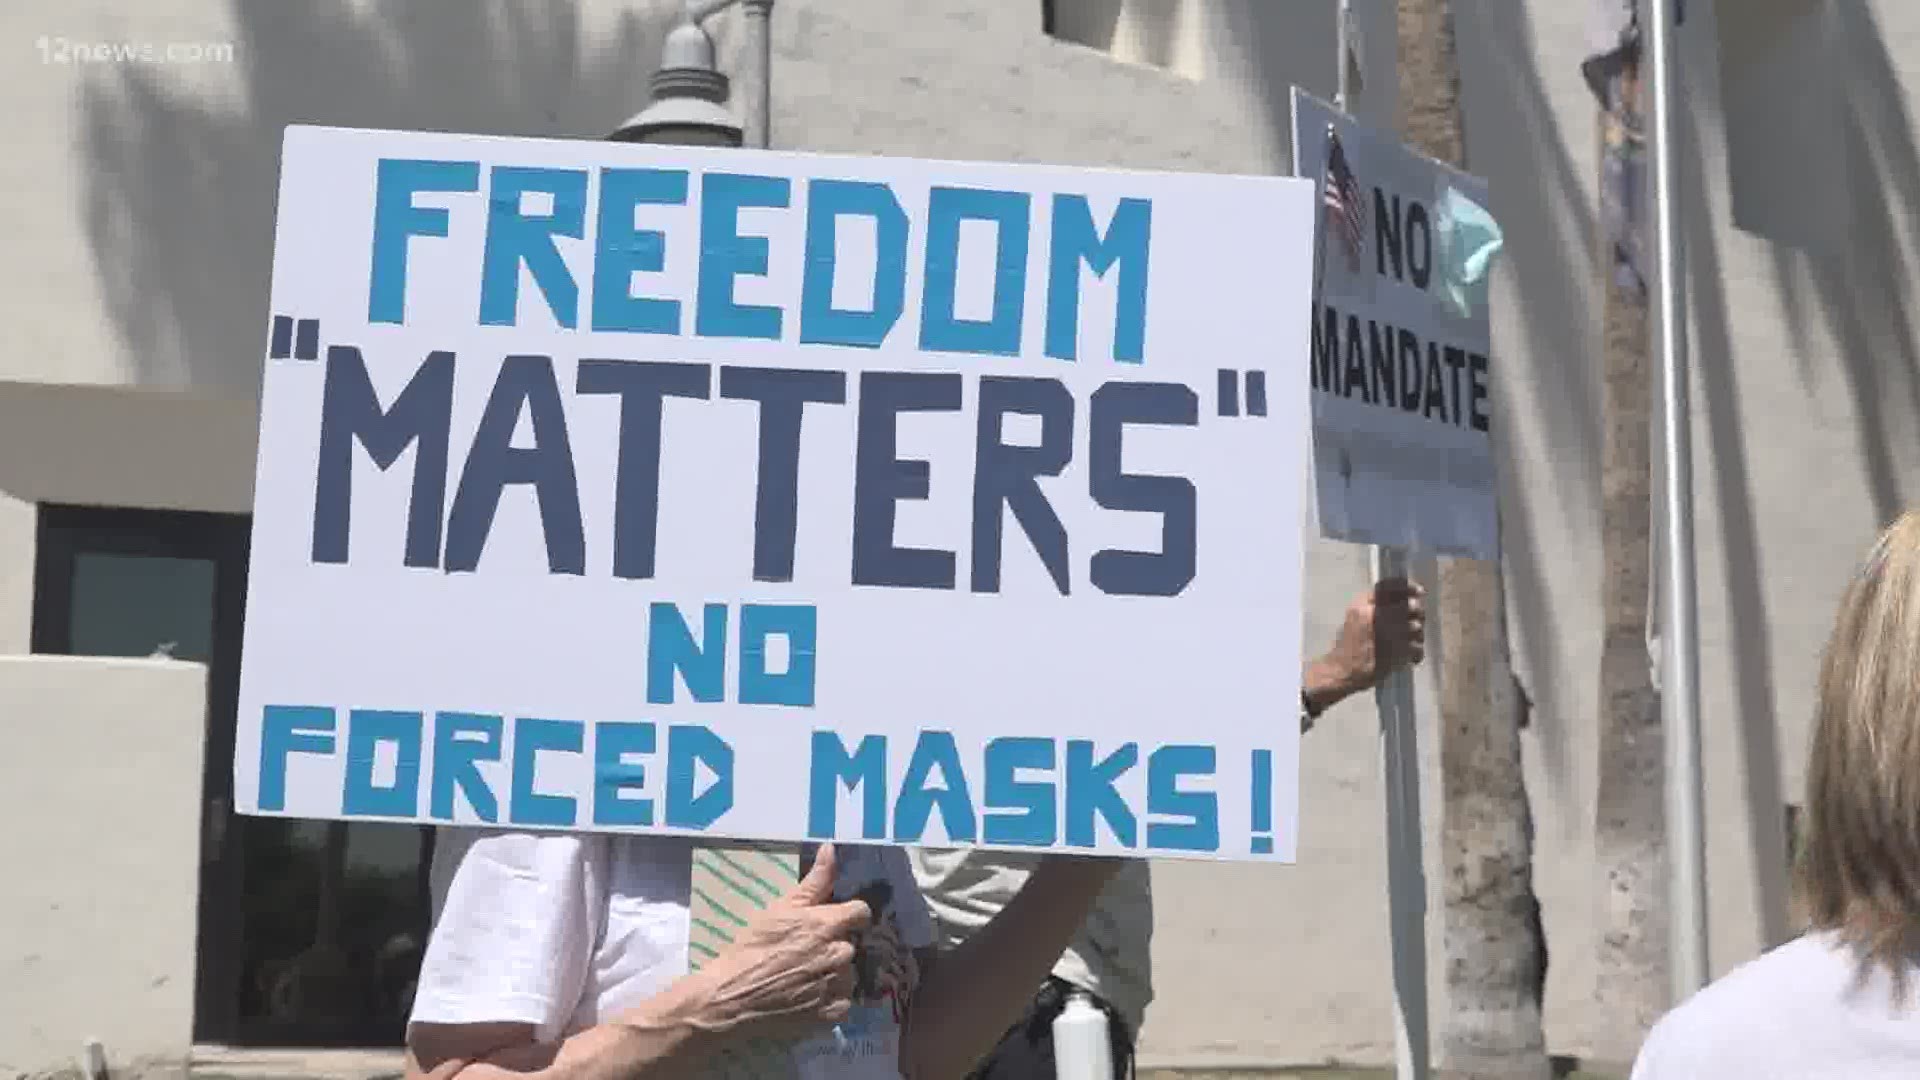 There were two camps of people at a rally in Scottsdale on Wednesday. Those who are opposed to masks. And those who are opposed to being told they have to wear one.